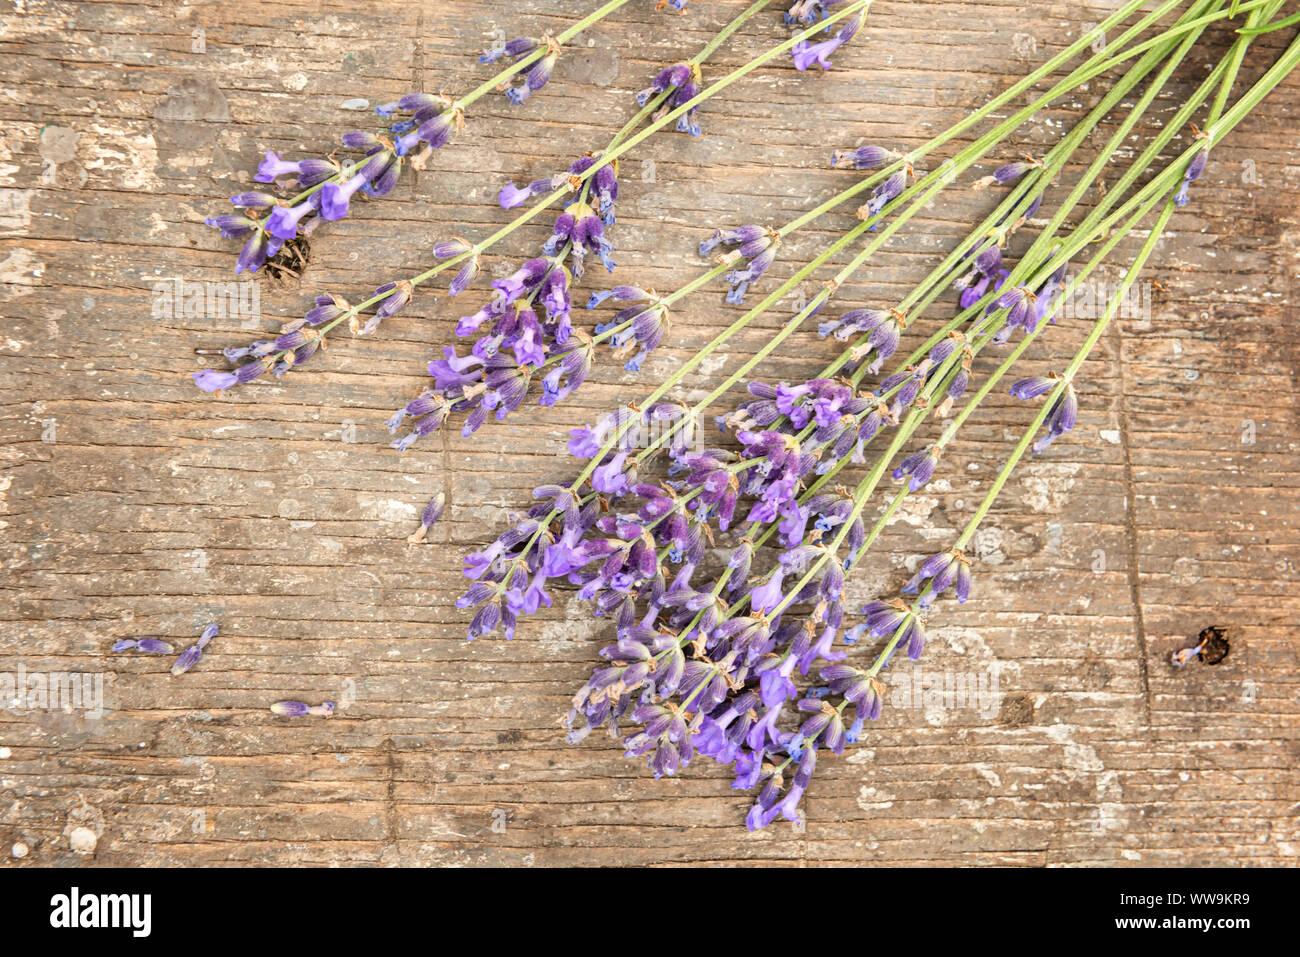 Close up of small bunch of beautiful, freshly cut lavender flowers on old rough textured natural wooden table surface. View from directly above. Horiz Stock Photo